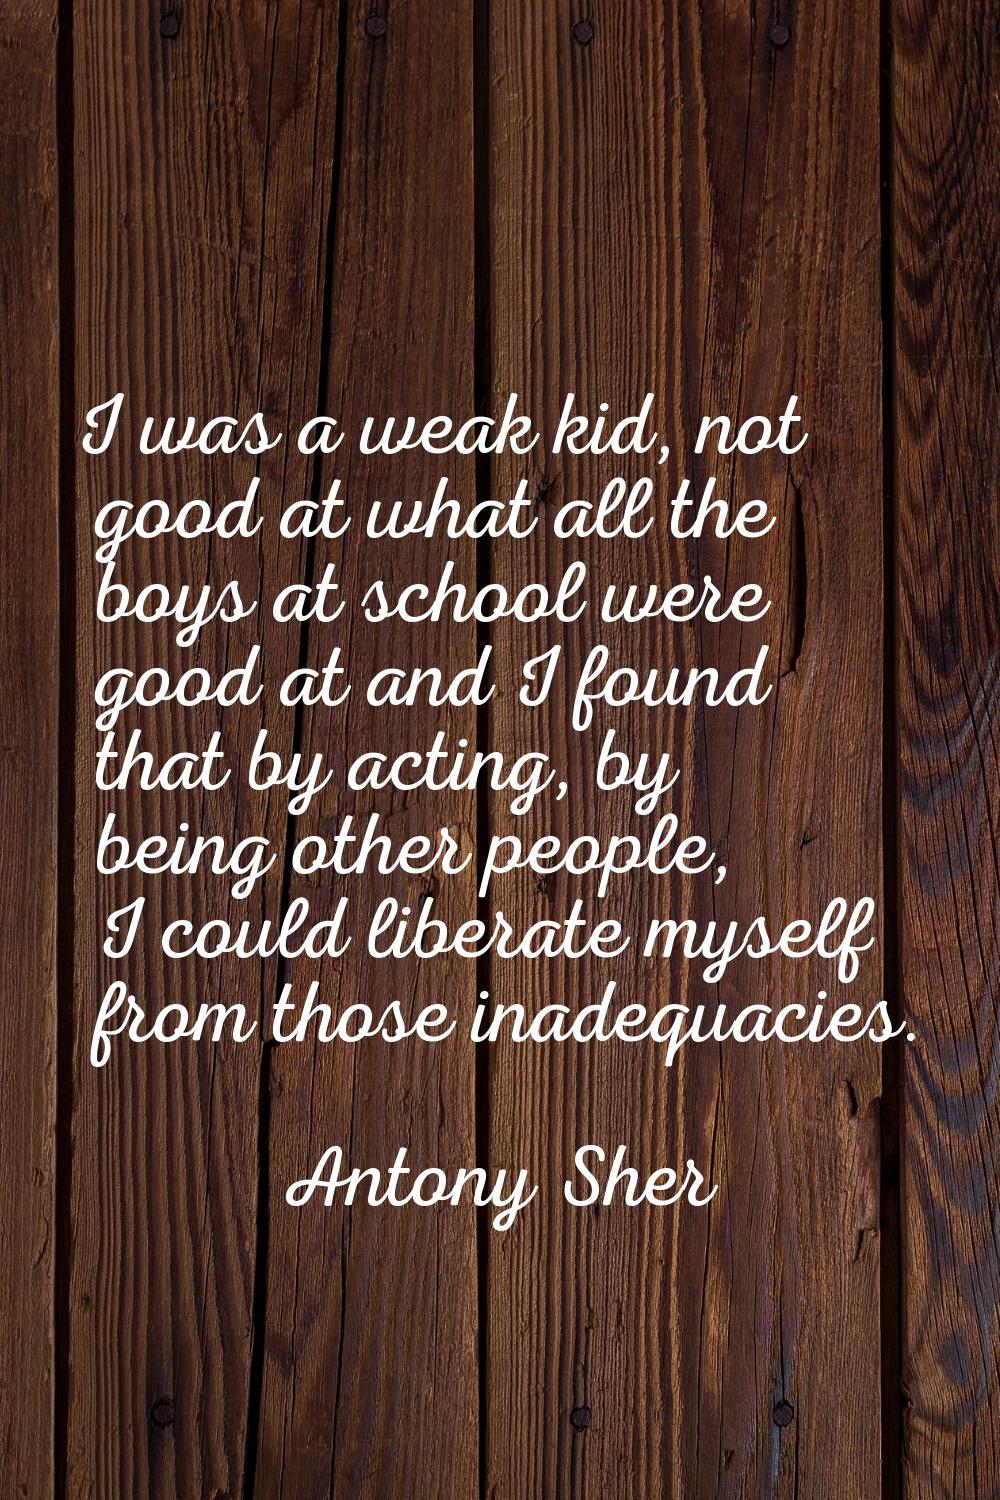 I was a weak kid, not good at what all the boys at school were good at and I found that by acting, 